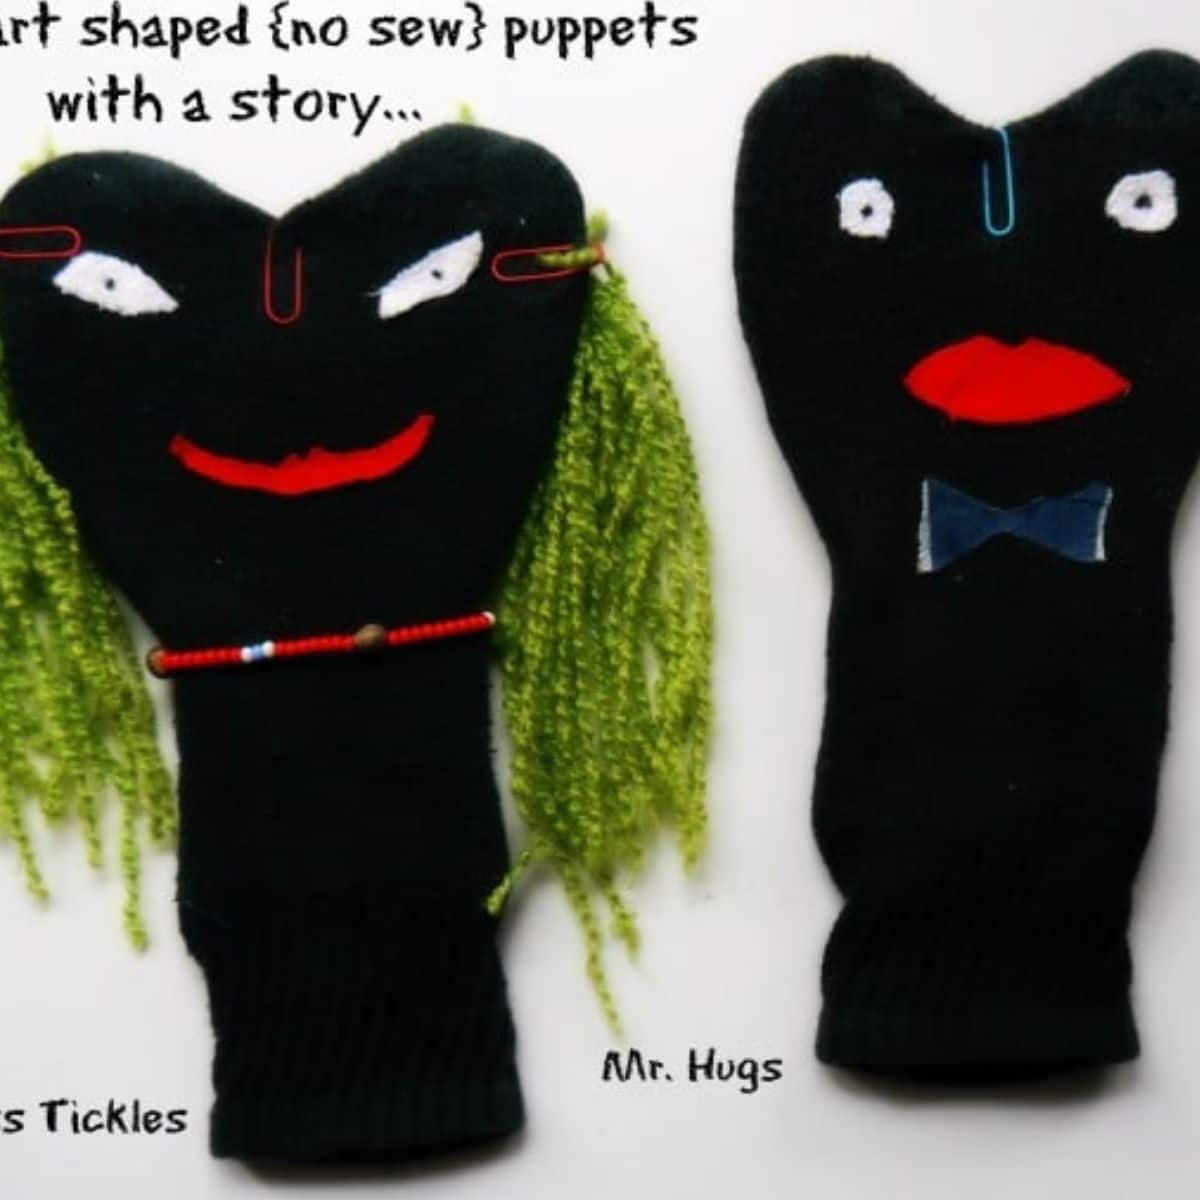 Twp cheesy and easy sock puppets.